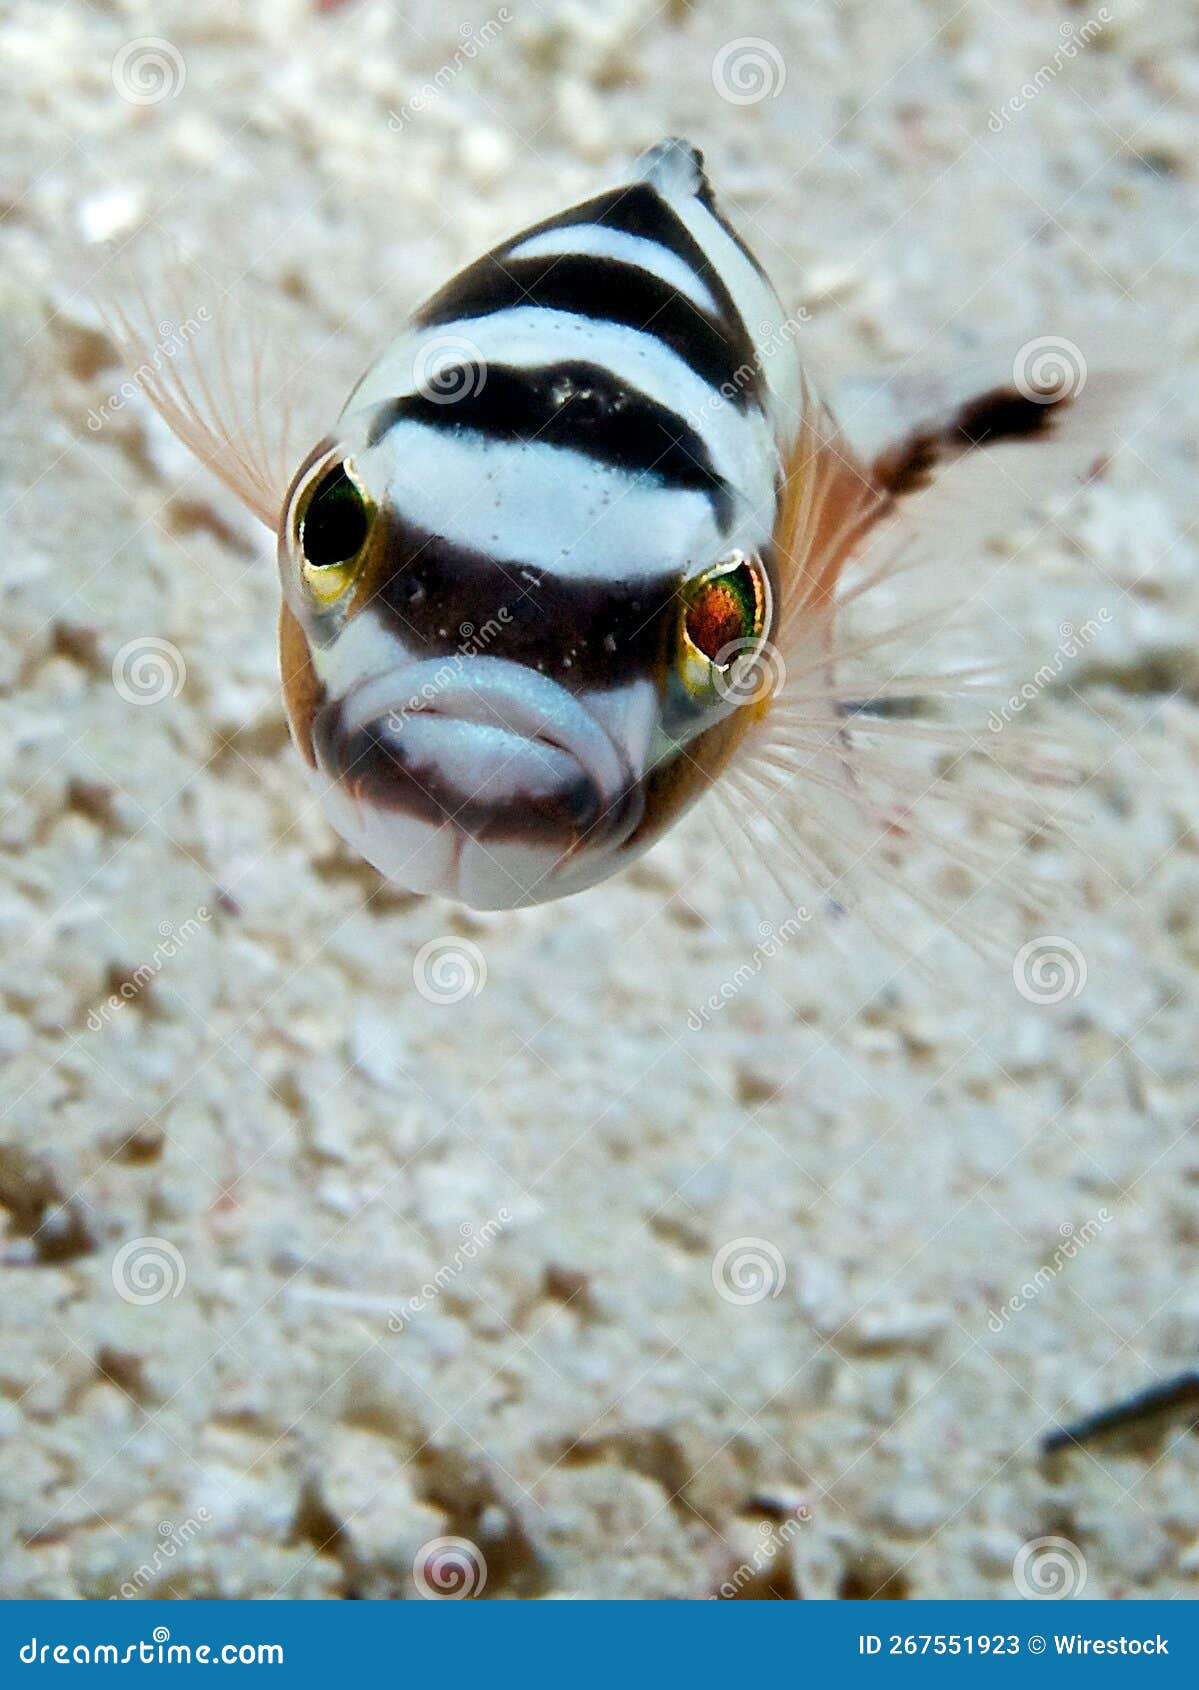 image of a white and black serranus fish swimming in the water.